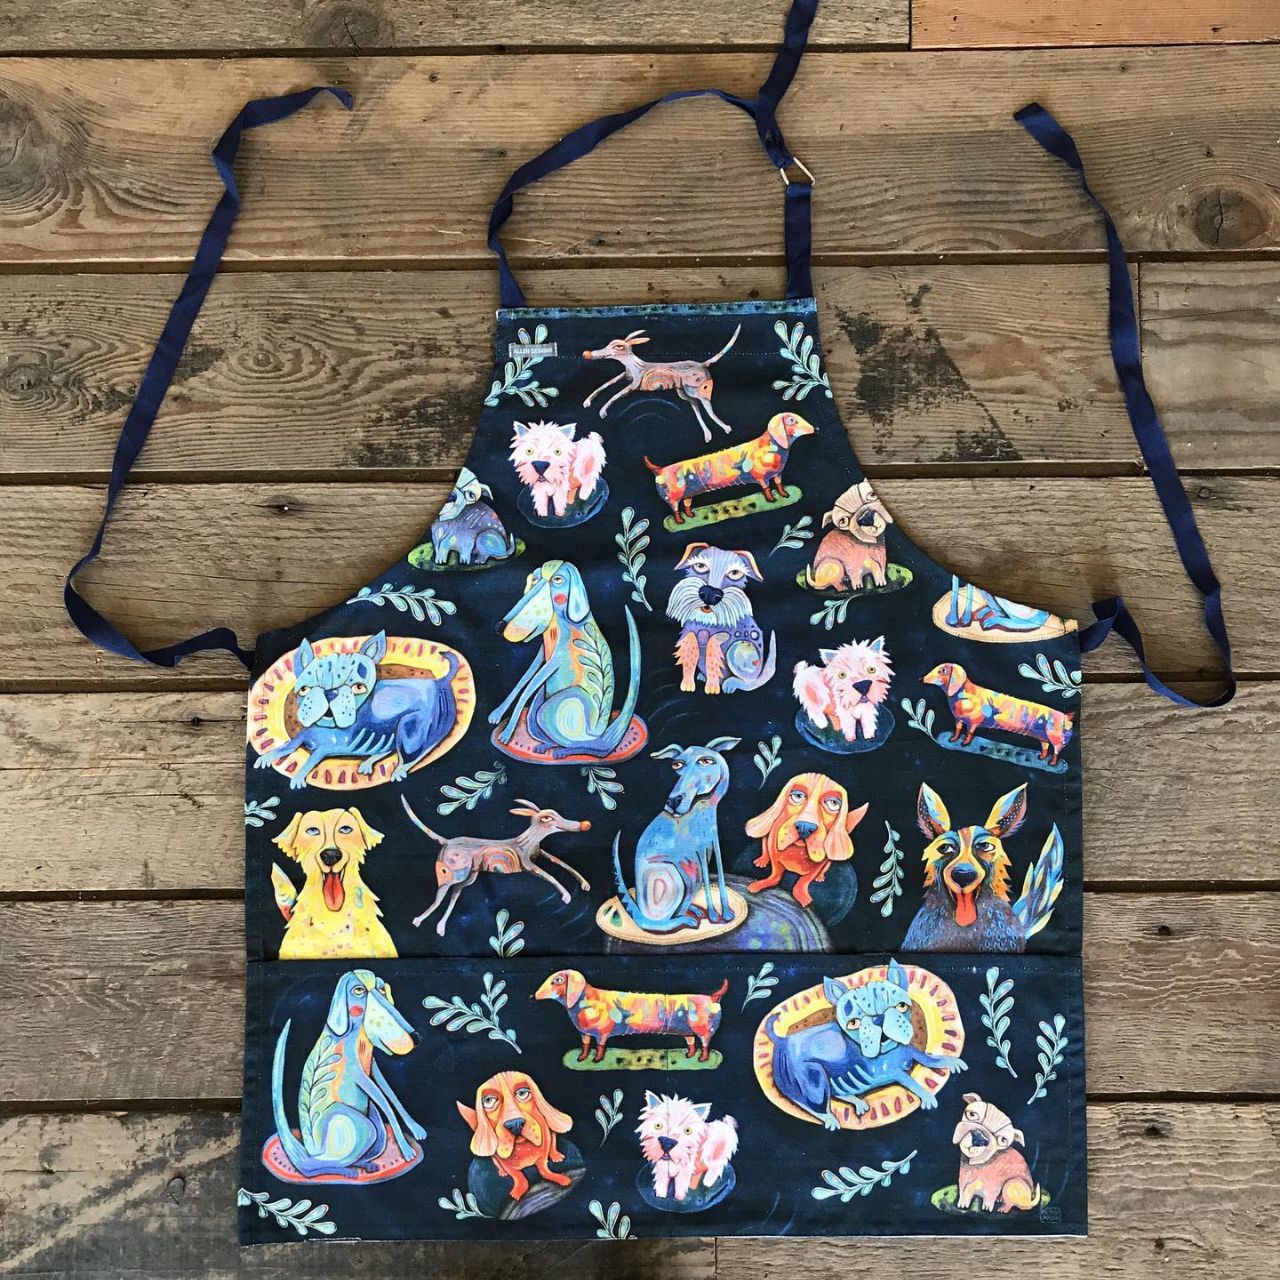 Kids Dog Park Apron by Allen Design  The kids in your life are going to love having an apron that was made just for them. This Dog Park apron is made of durable cotton canvas, and is perfect for crafting, gardening, helping out in the kitchen, or just looking like the coolest kid in the house. Exclusively designed by Michelle Allen.